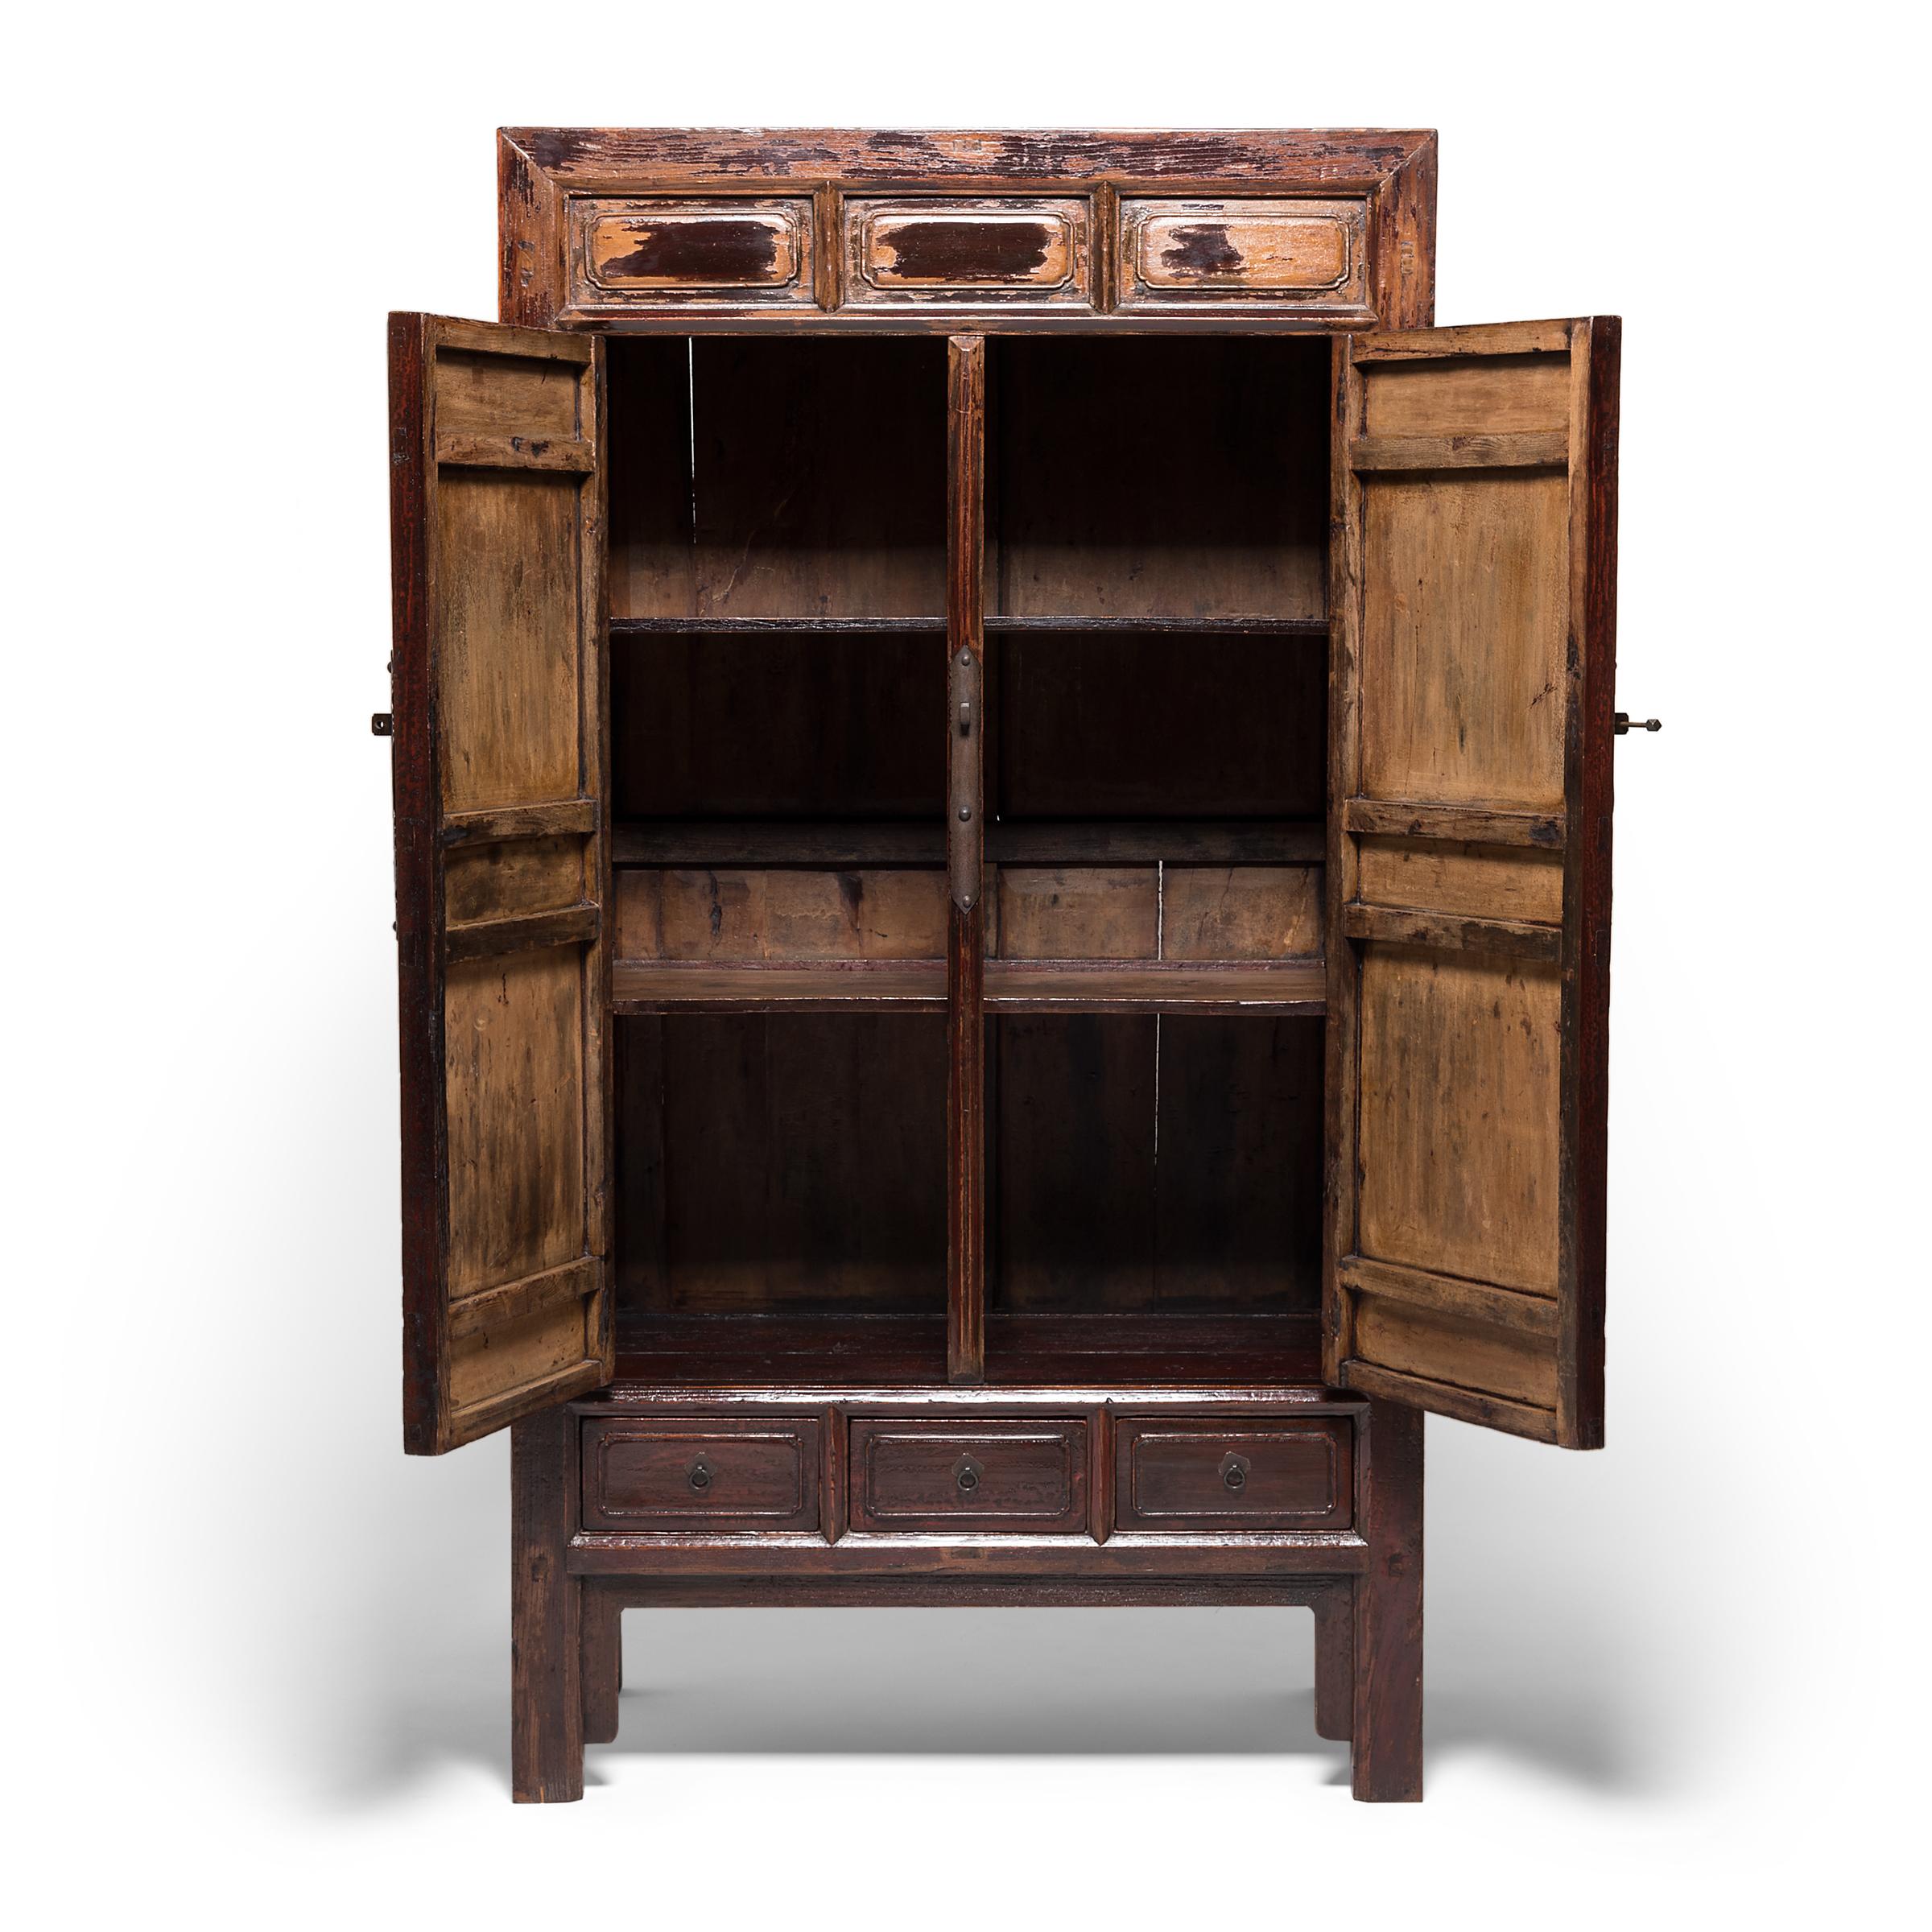 This is an exquisite example of a 17th century square corner cabinet, constructed with masterful mortise and tenon joinery. It features two paneled doors attached with small barrel hinges, a reference to traditional cabinets designs from thousands